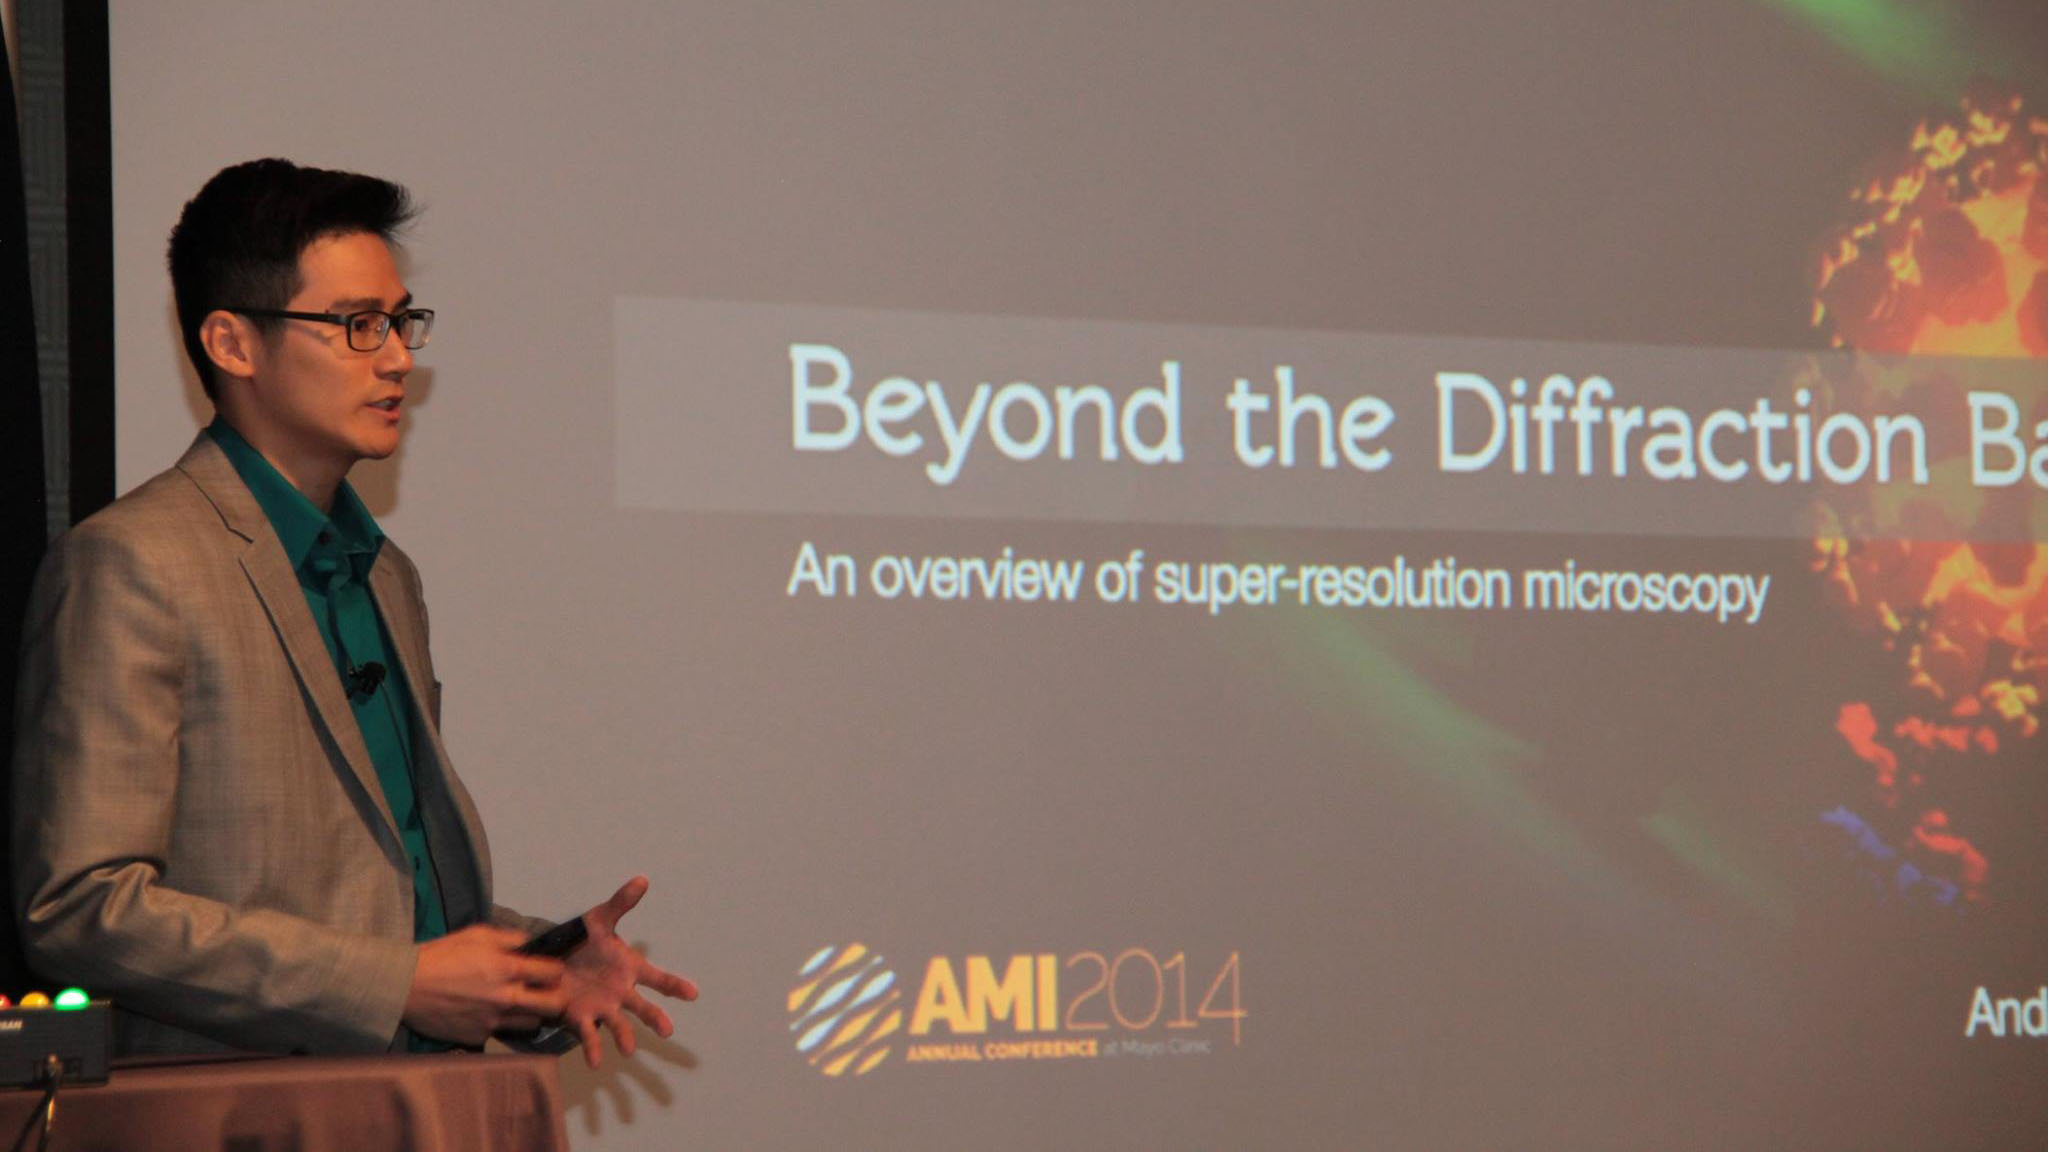 Andrew presents his Master's Research Project at AMI 2014